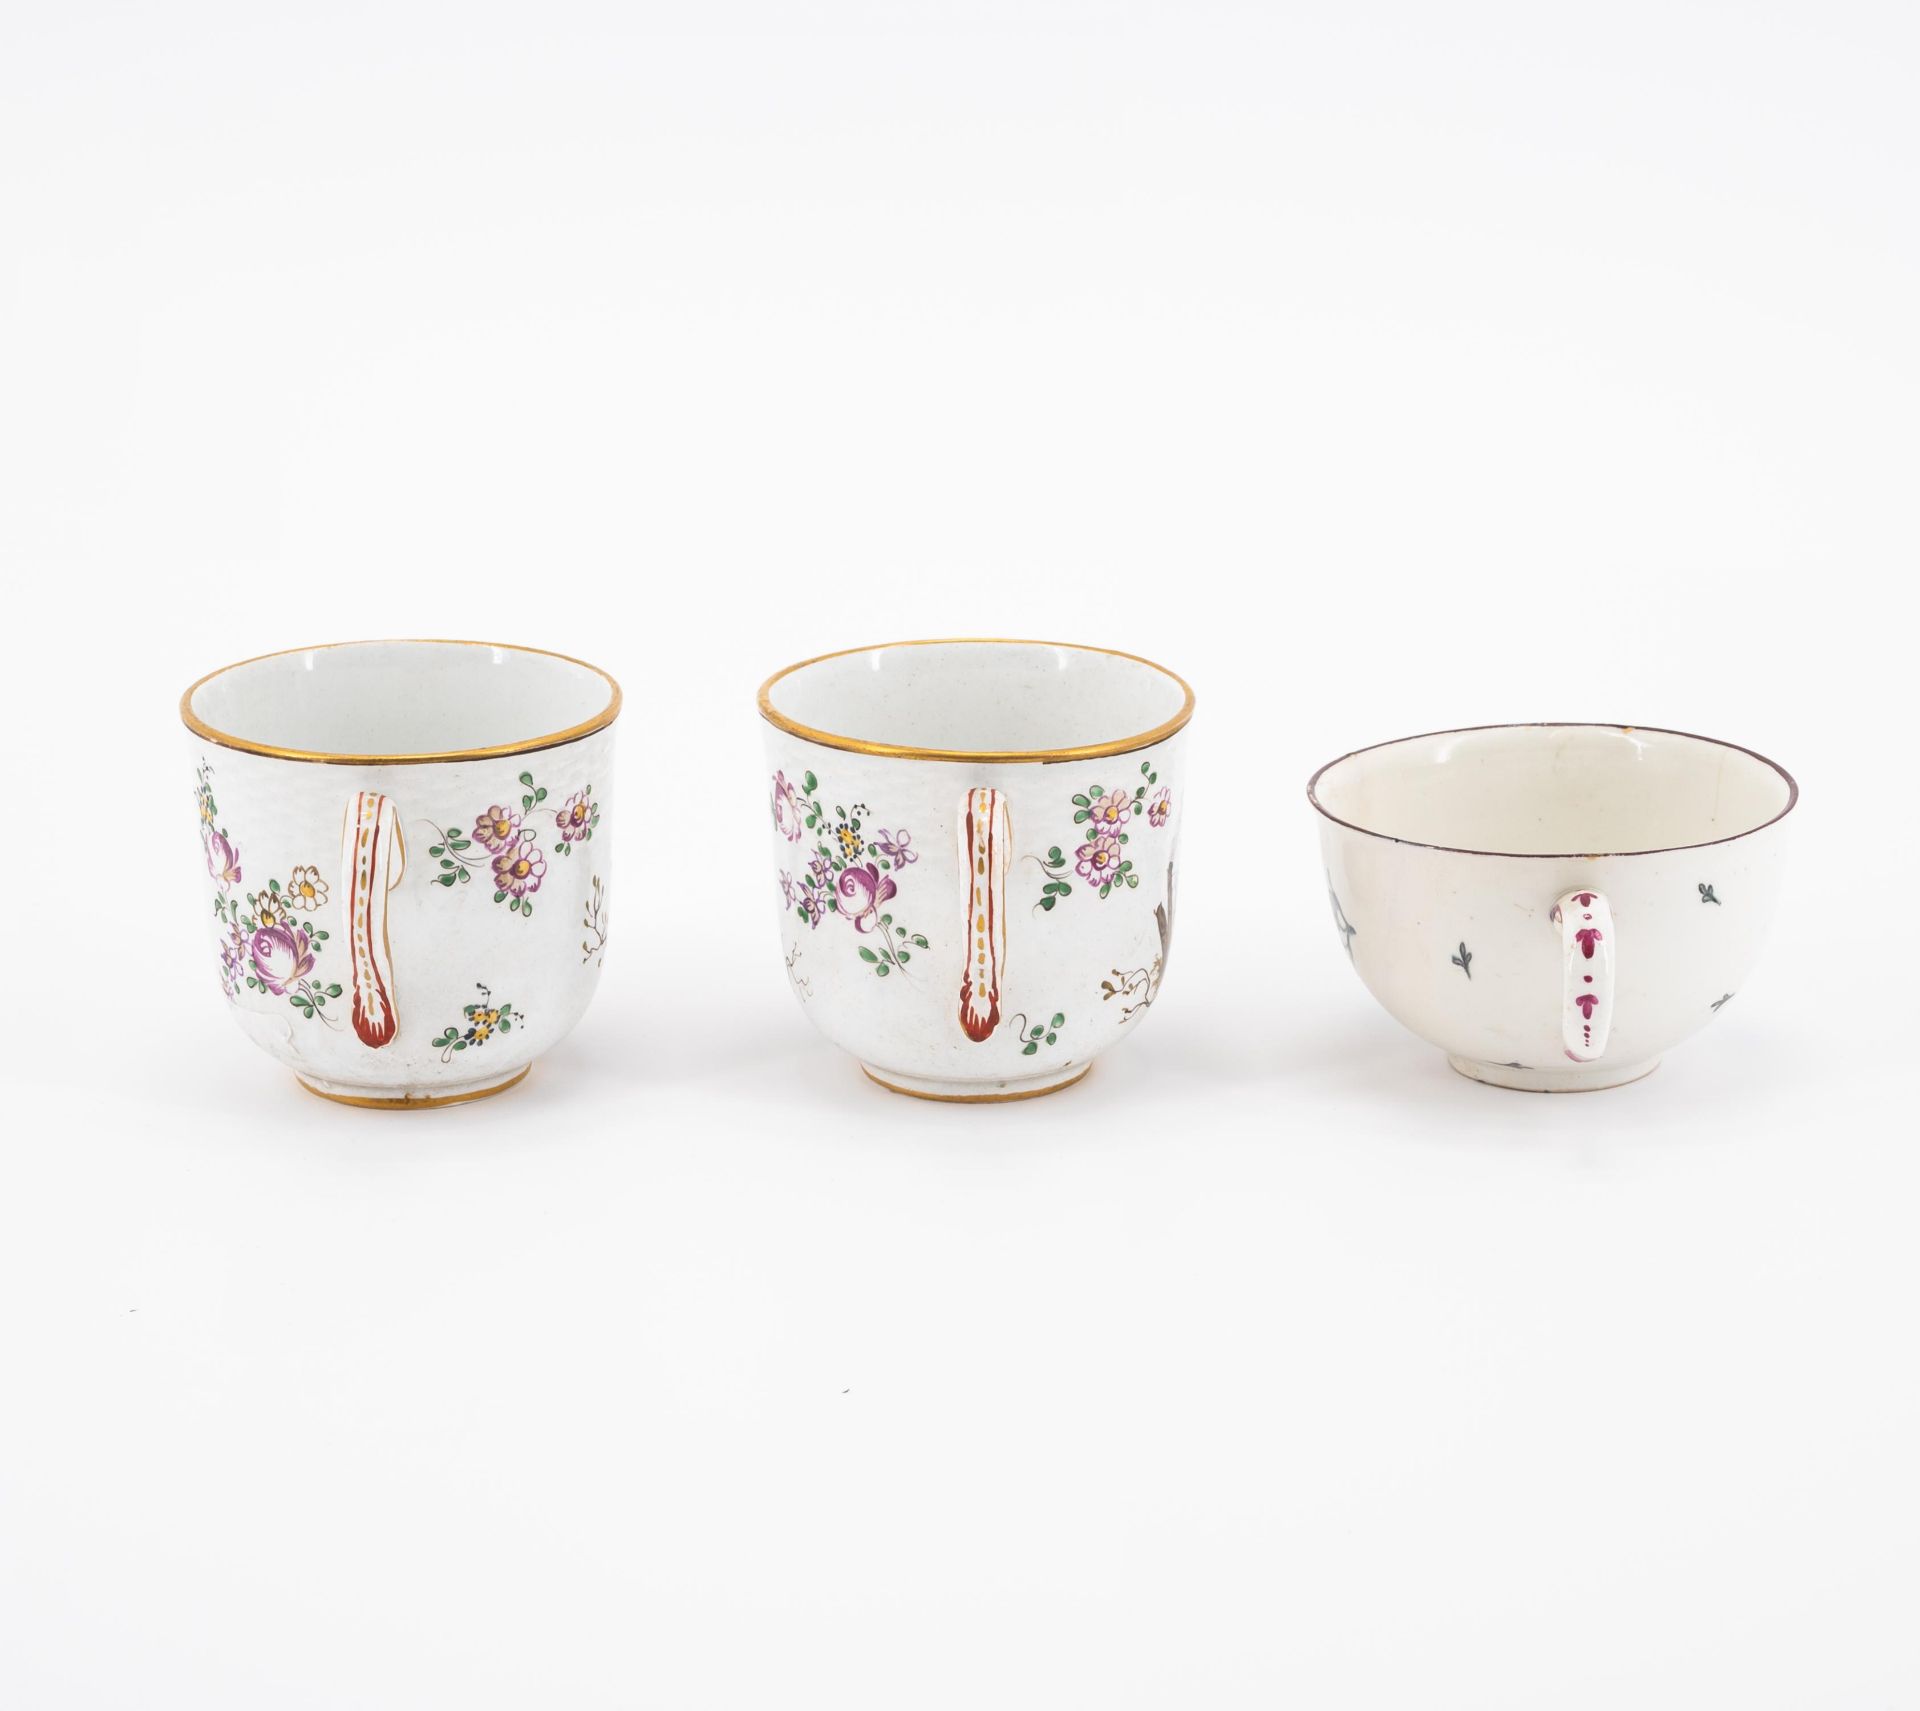 SIX PORCELAIN CUPS AND THREE SAUCERS WITH BIRD DECOR, FLOWERS AND LANDSCAPE SCENES - Image 3 of 16